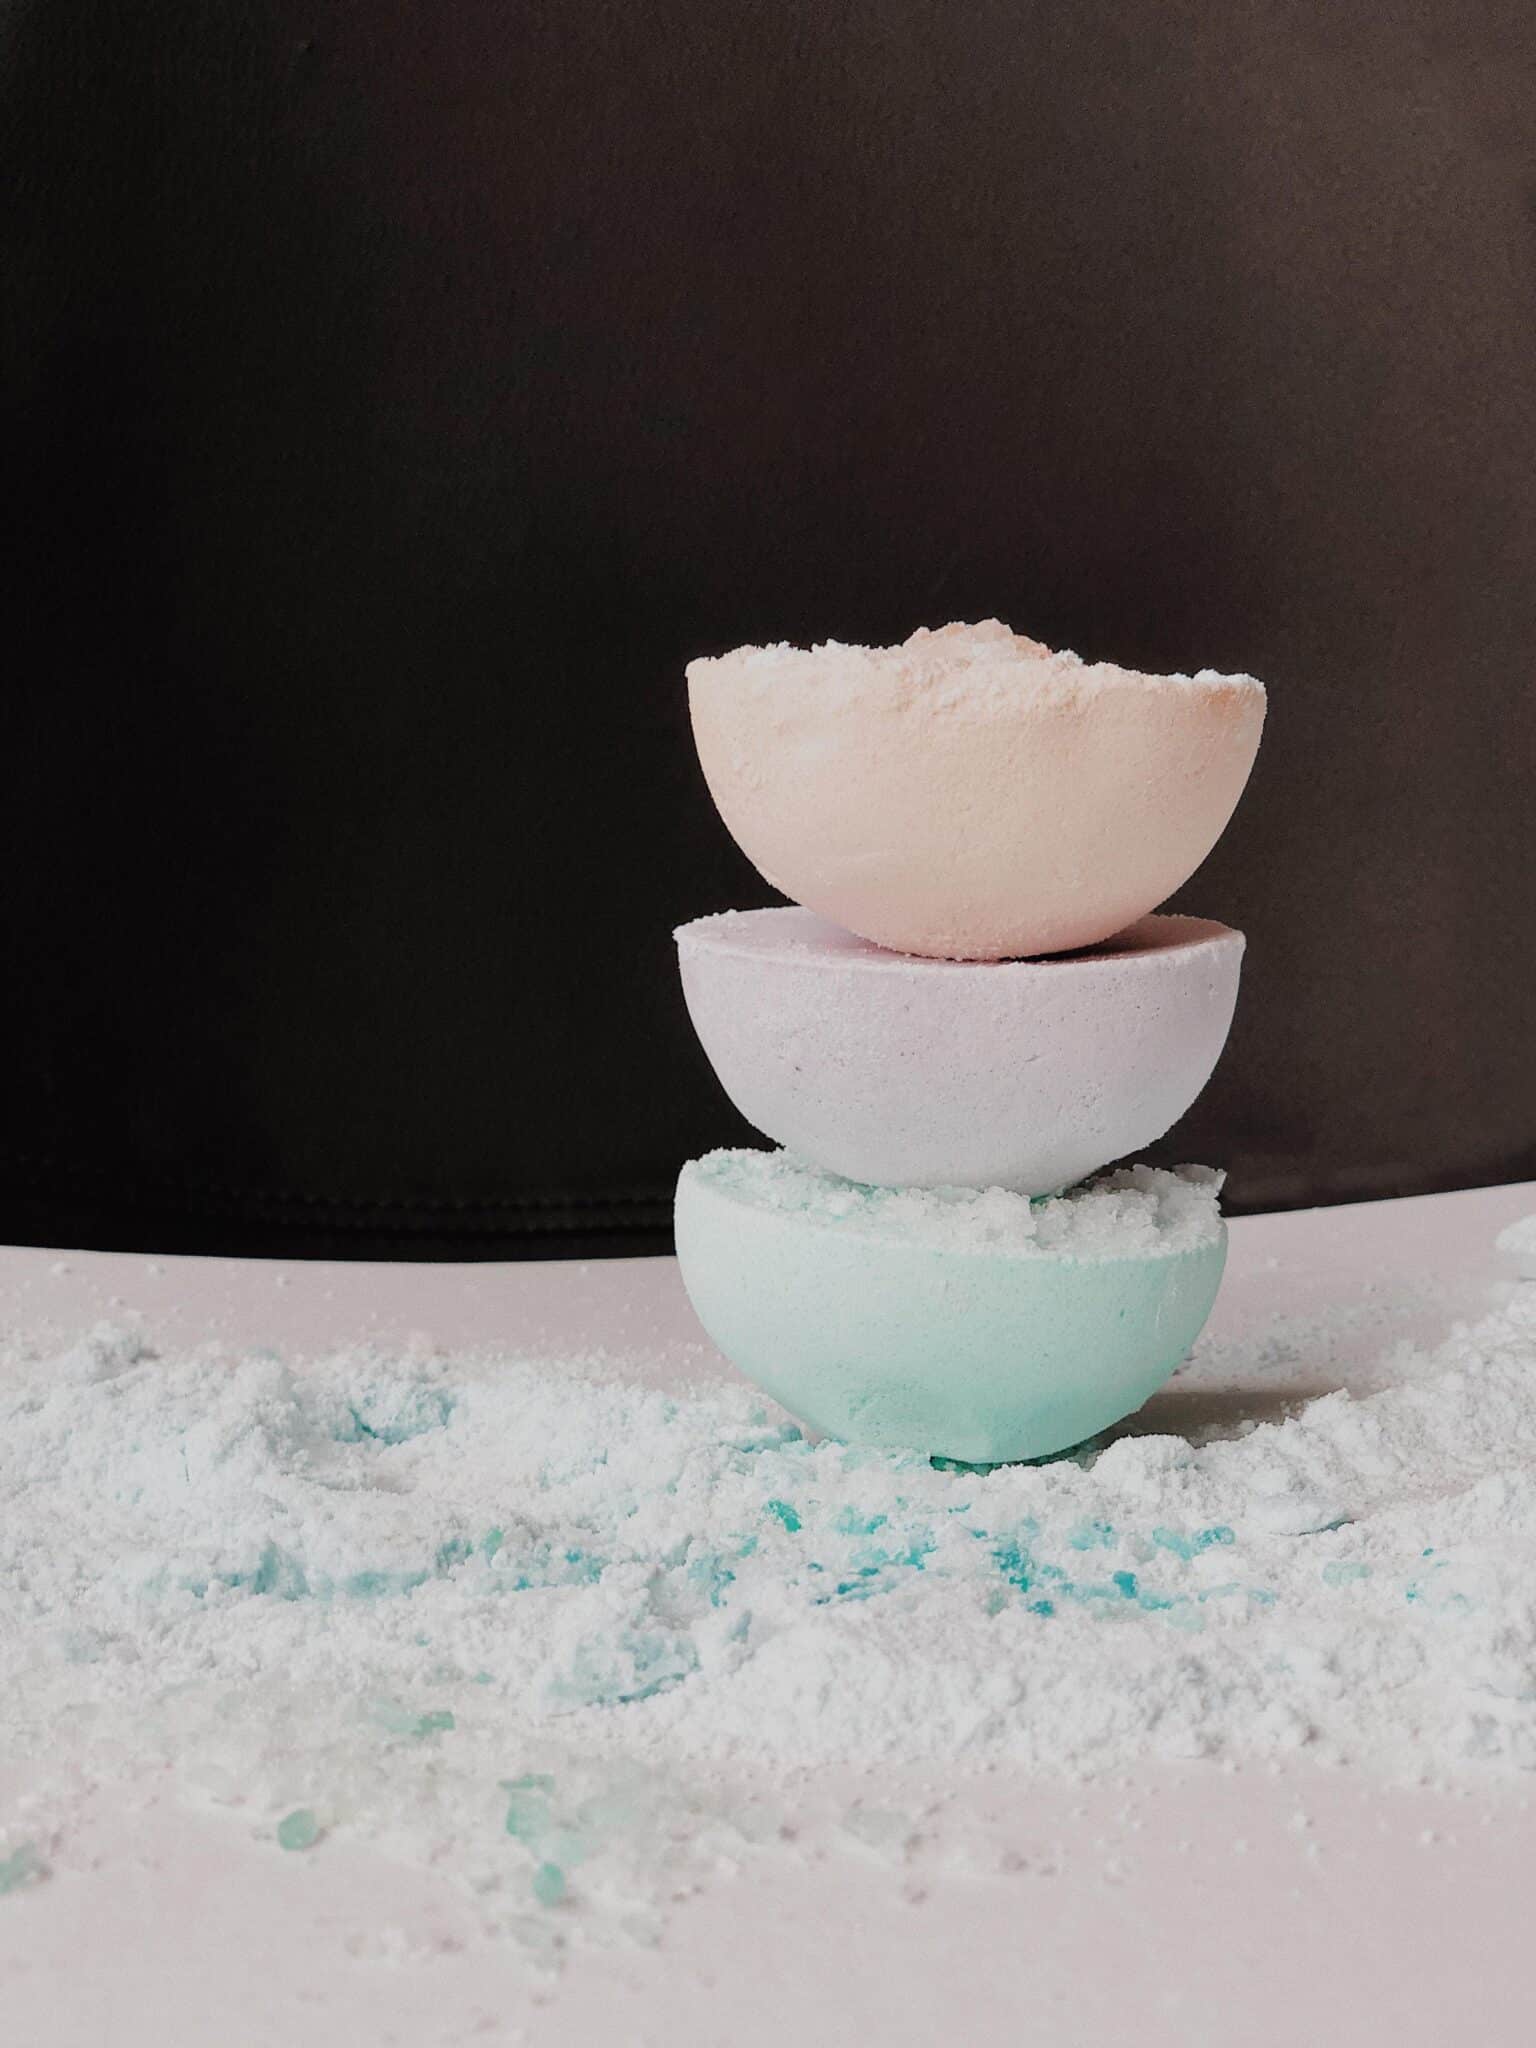 5 Best CBD Bath Bombs for 2022: Reviews and Guide